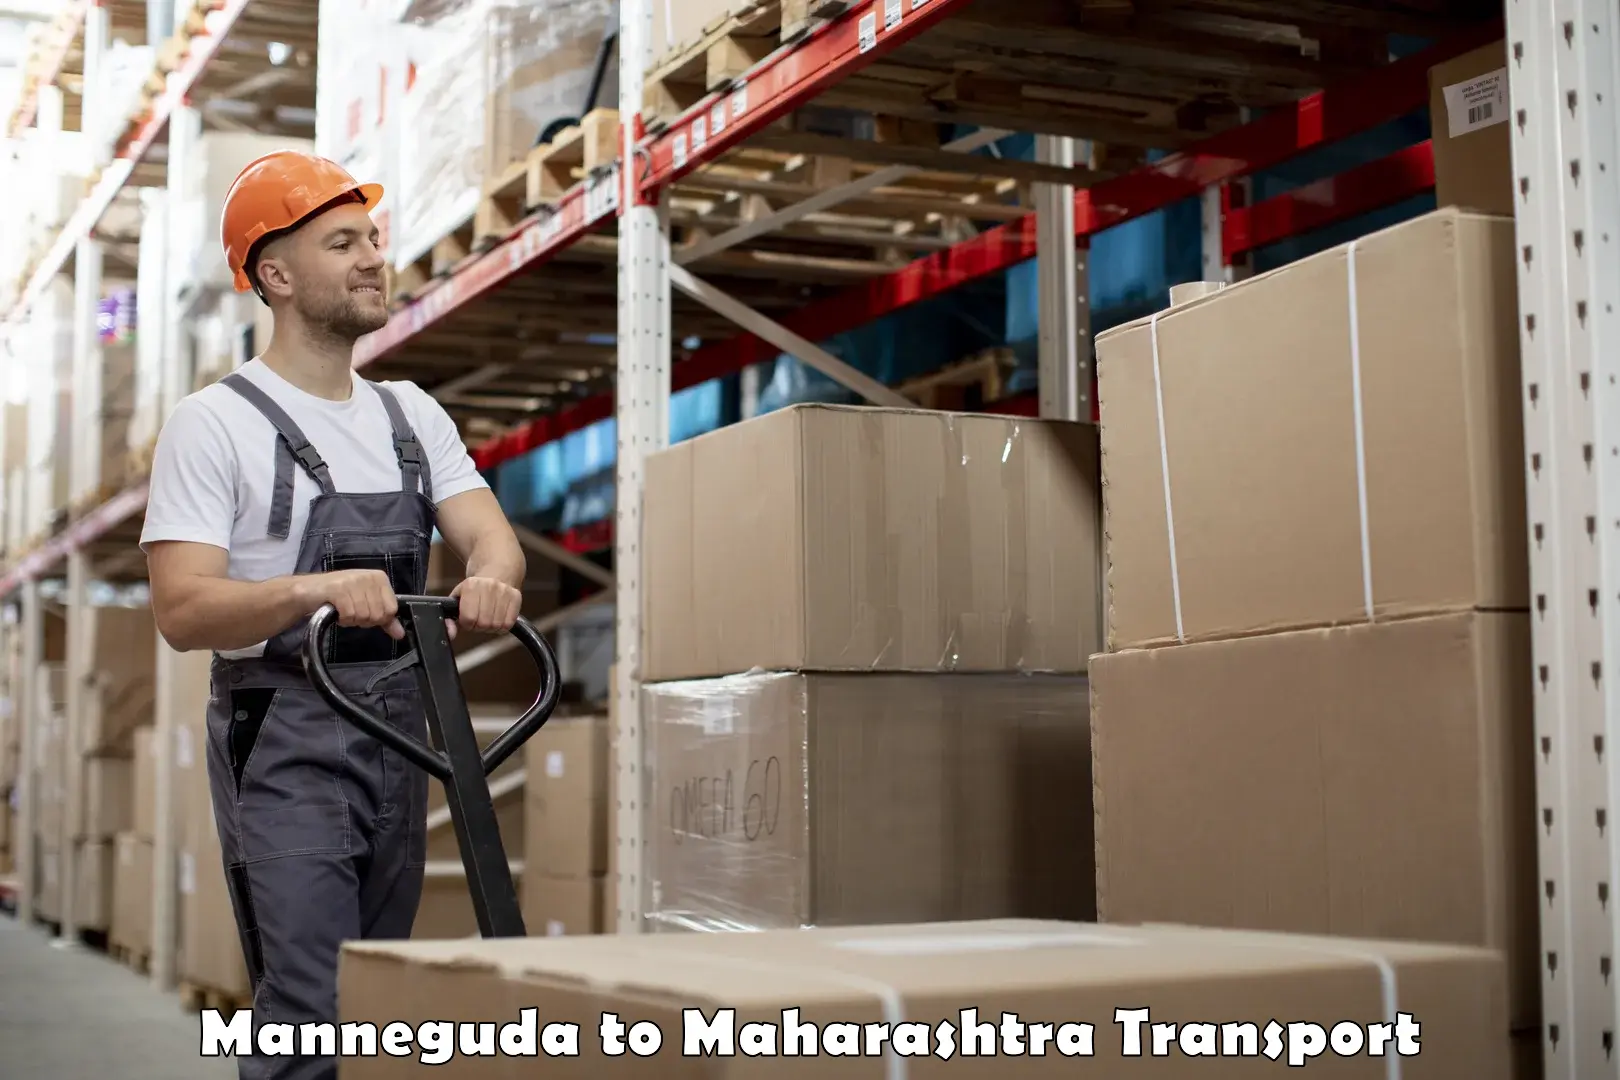 Truck transport companies in India Manneguda to Lonar